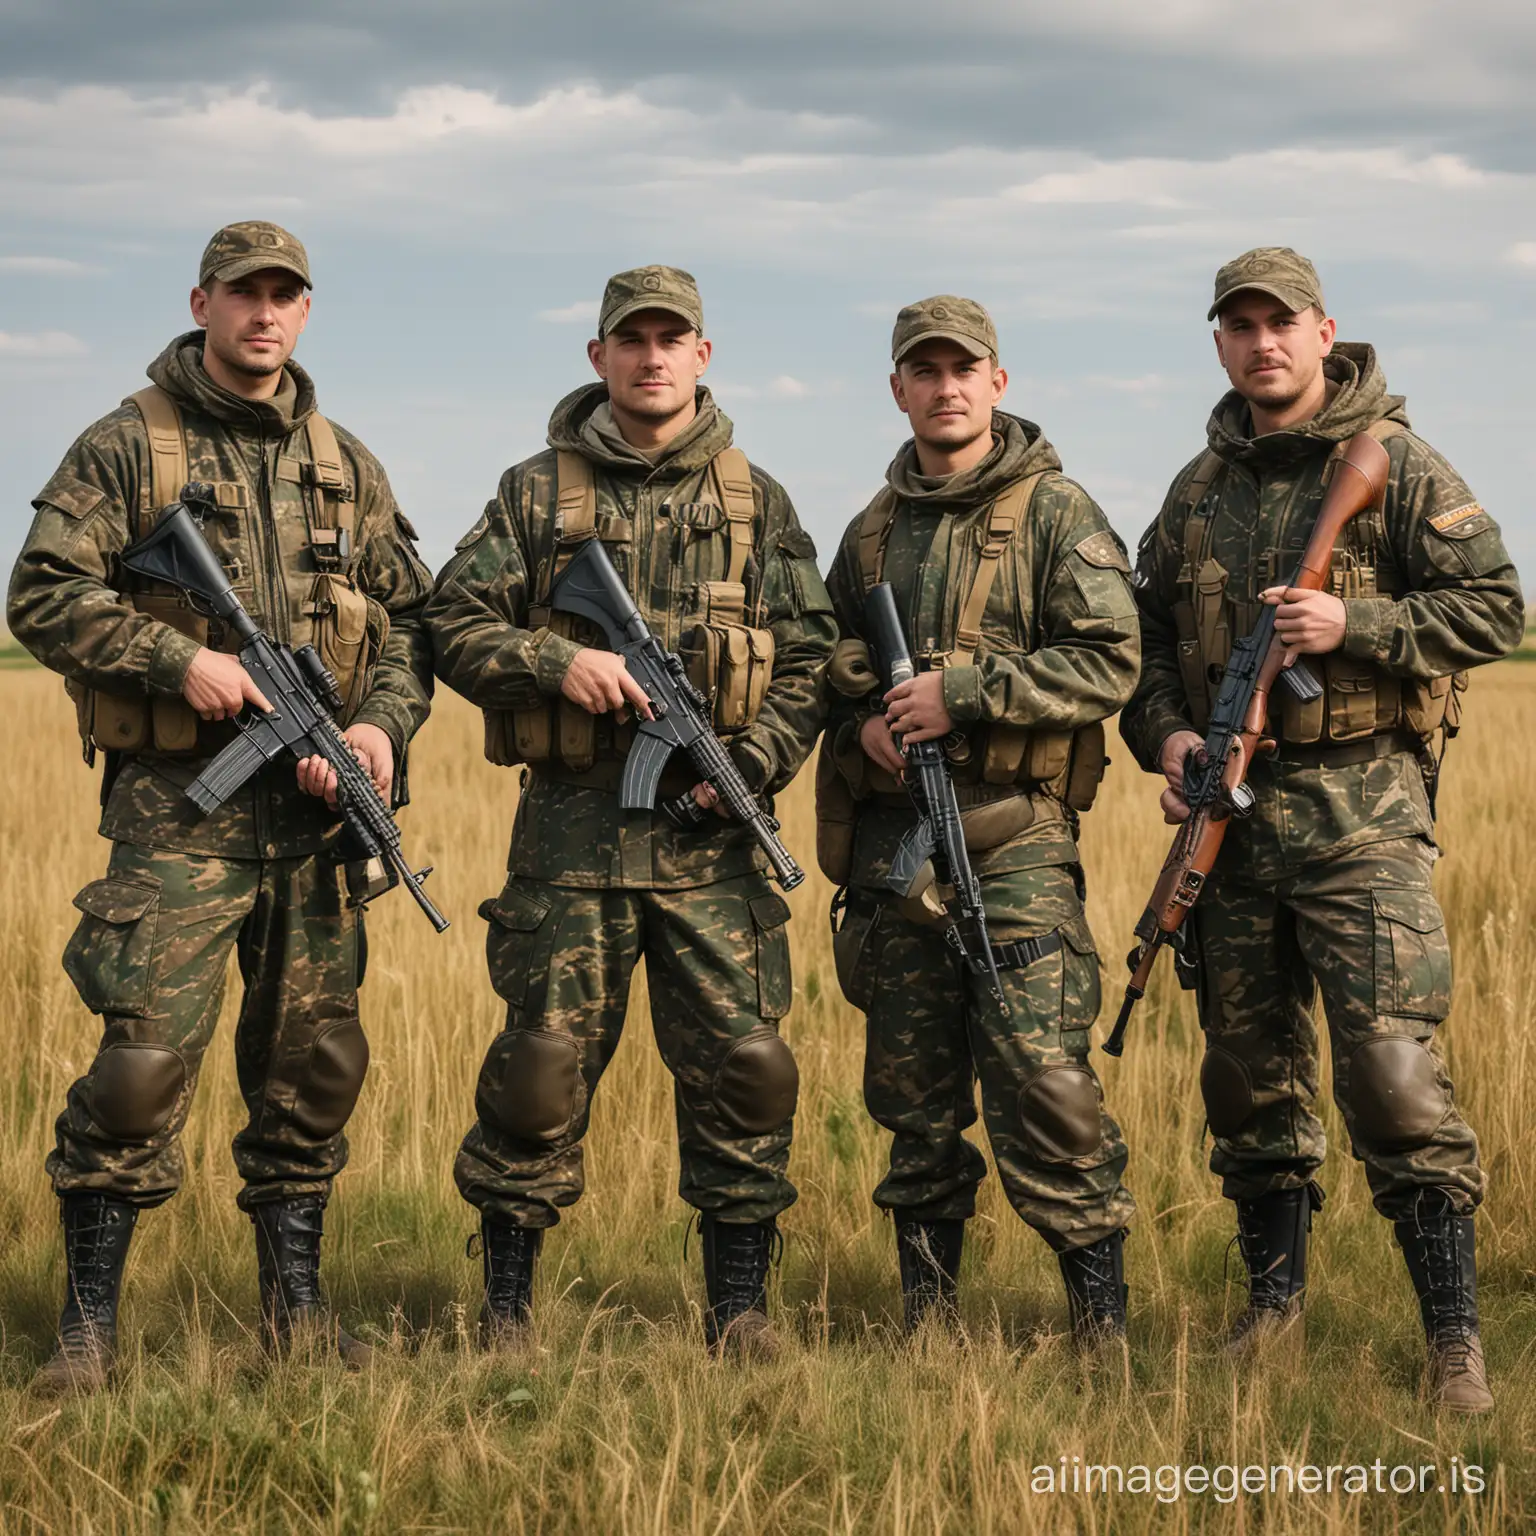 four hunters in full height. against the background of the field. holding weapons and beer. dressed in camouflage suits.